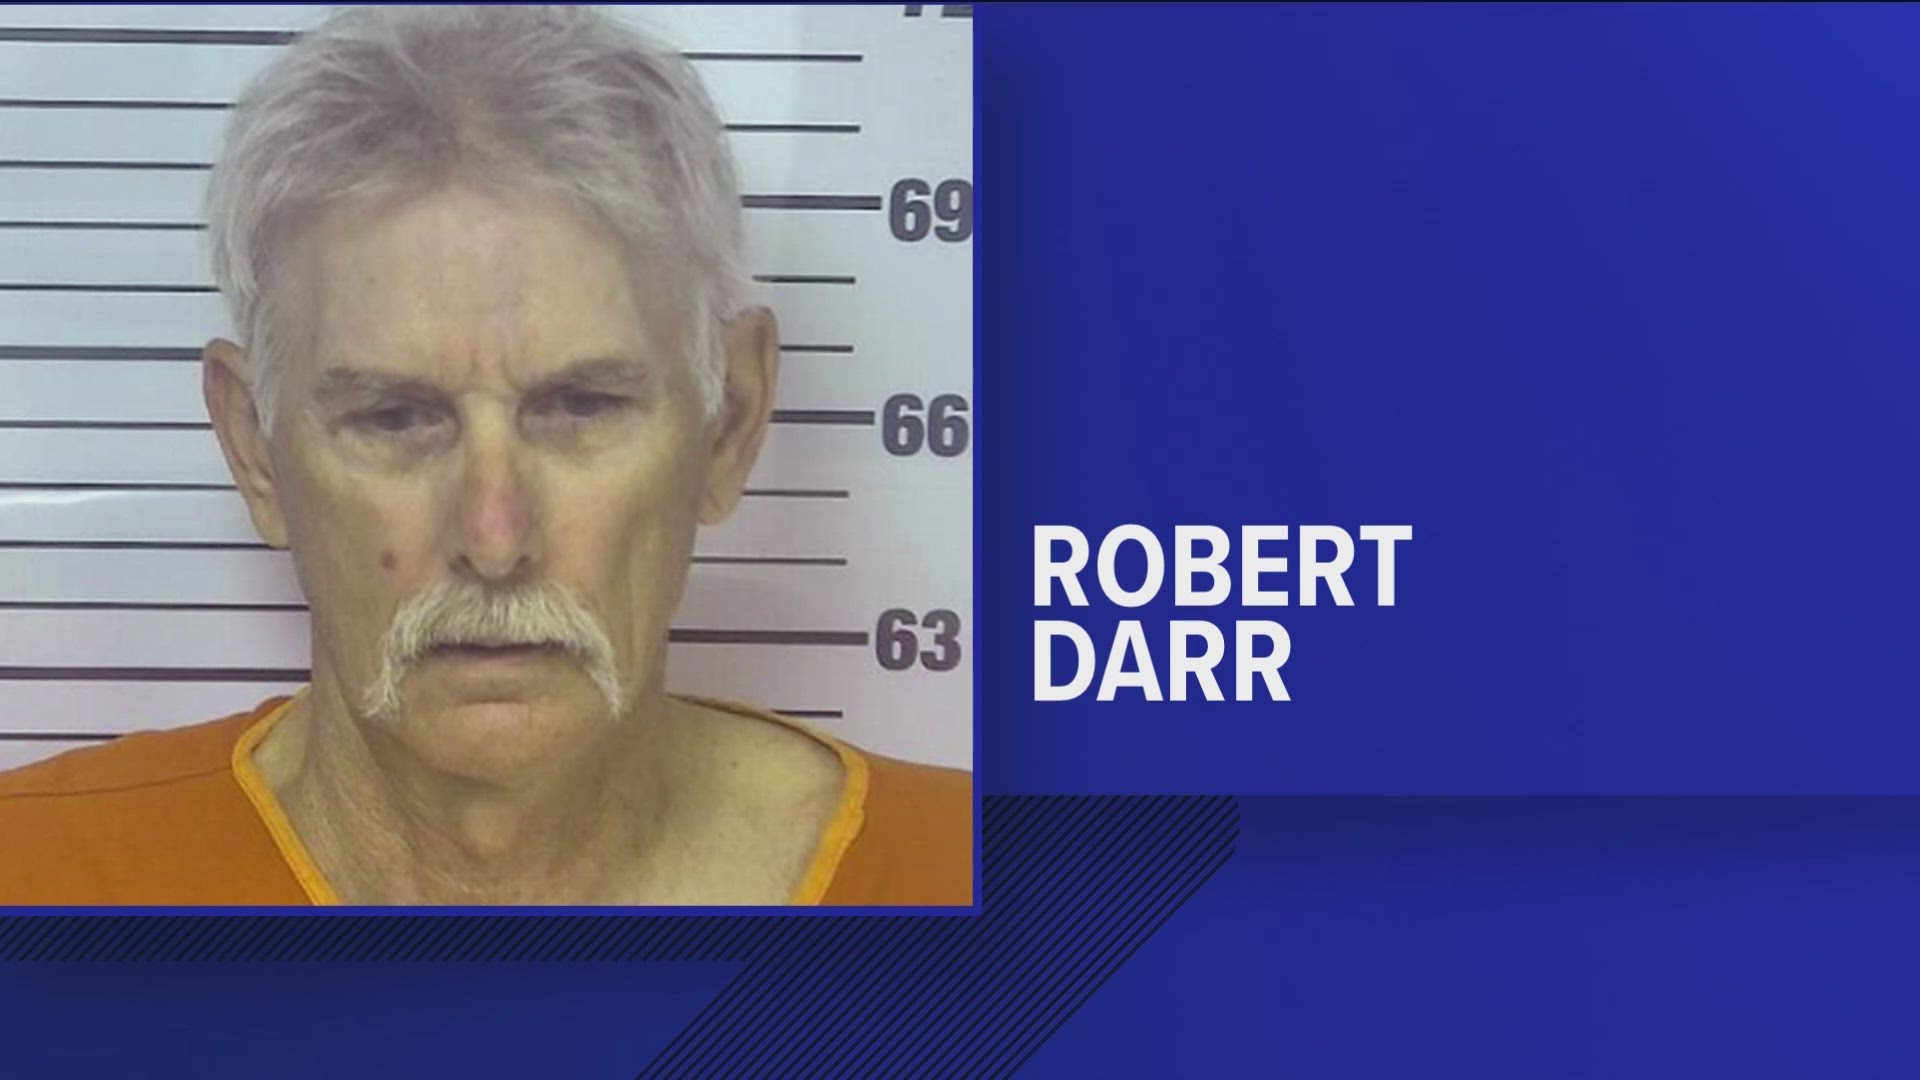 Robert Darr was arrested Wednesday and is accused of sexually touching a child.